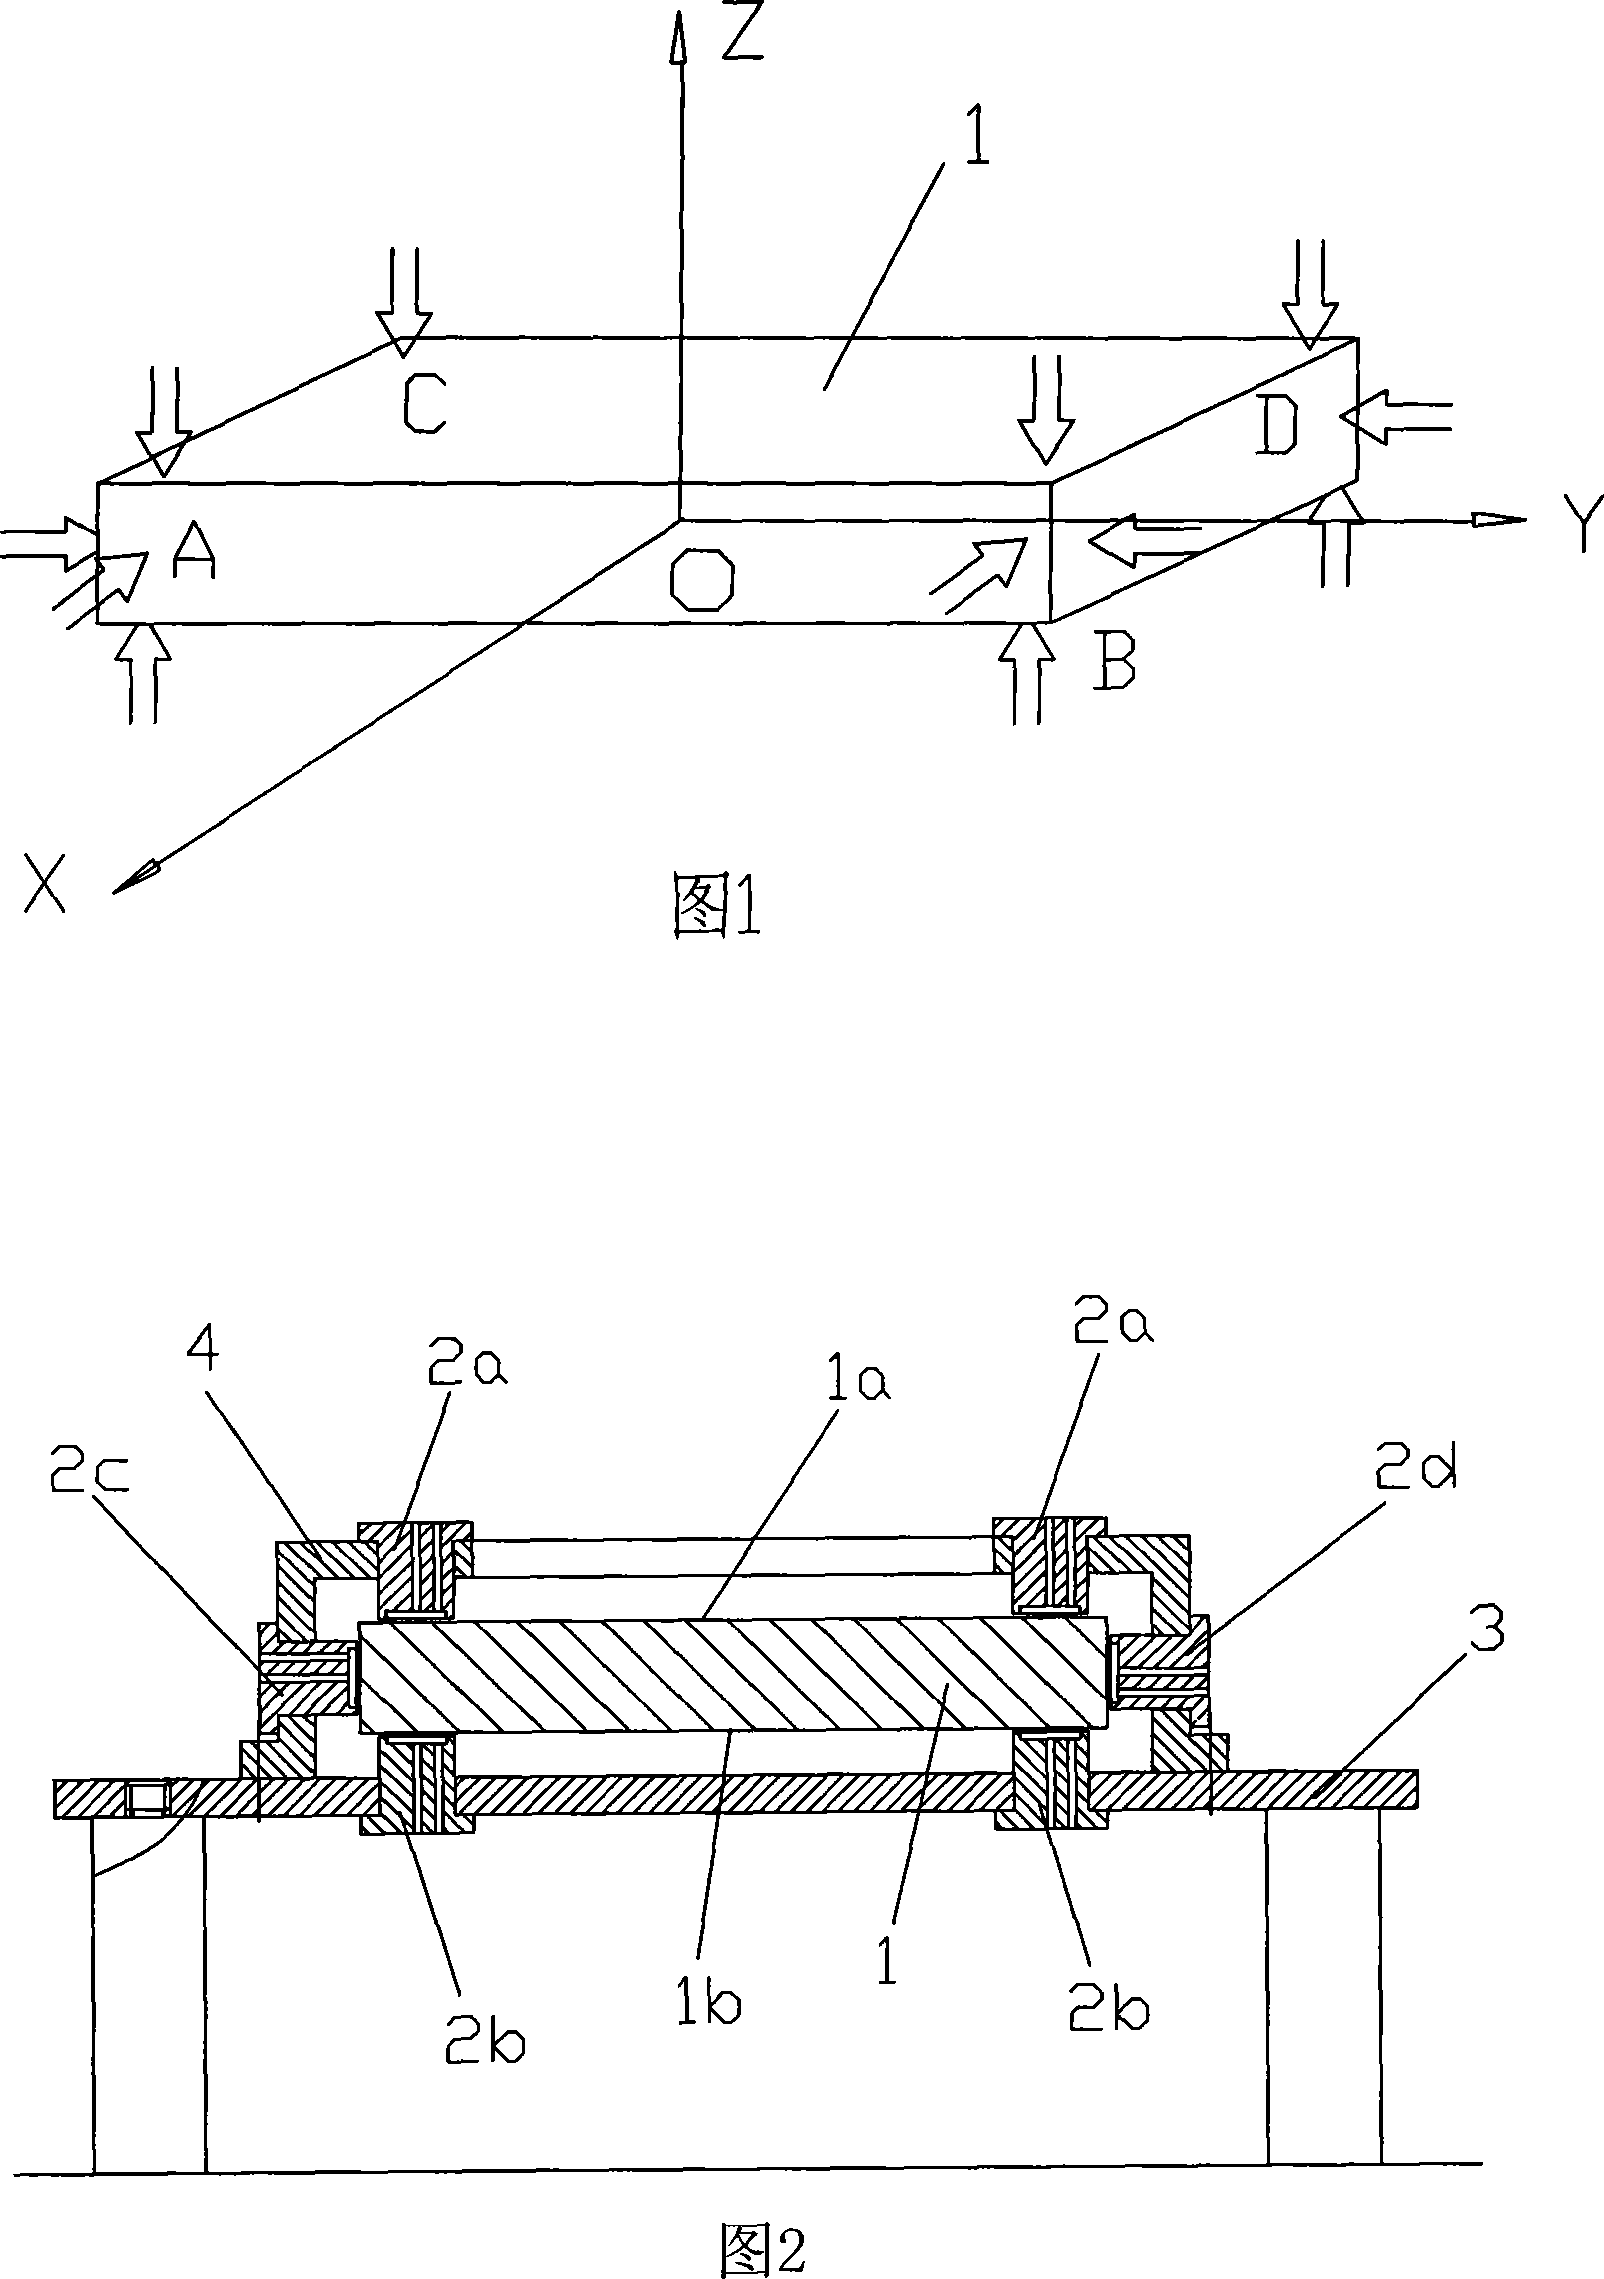 Air-floating type multidimensional force sensor and multidimensional force measuring method